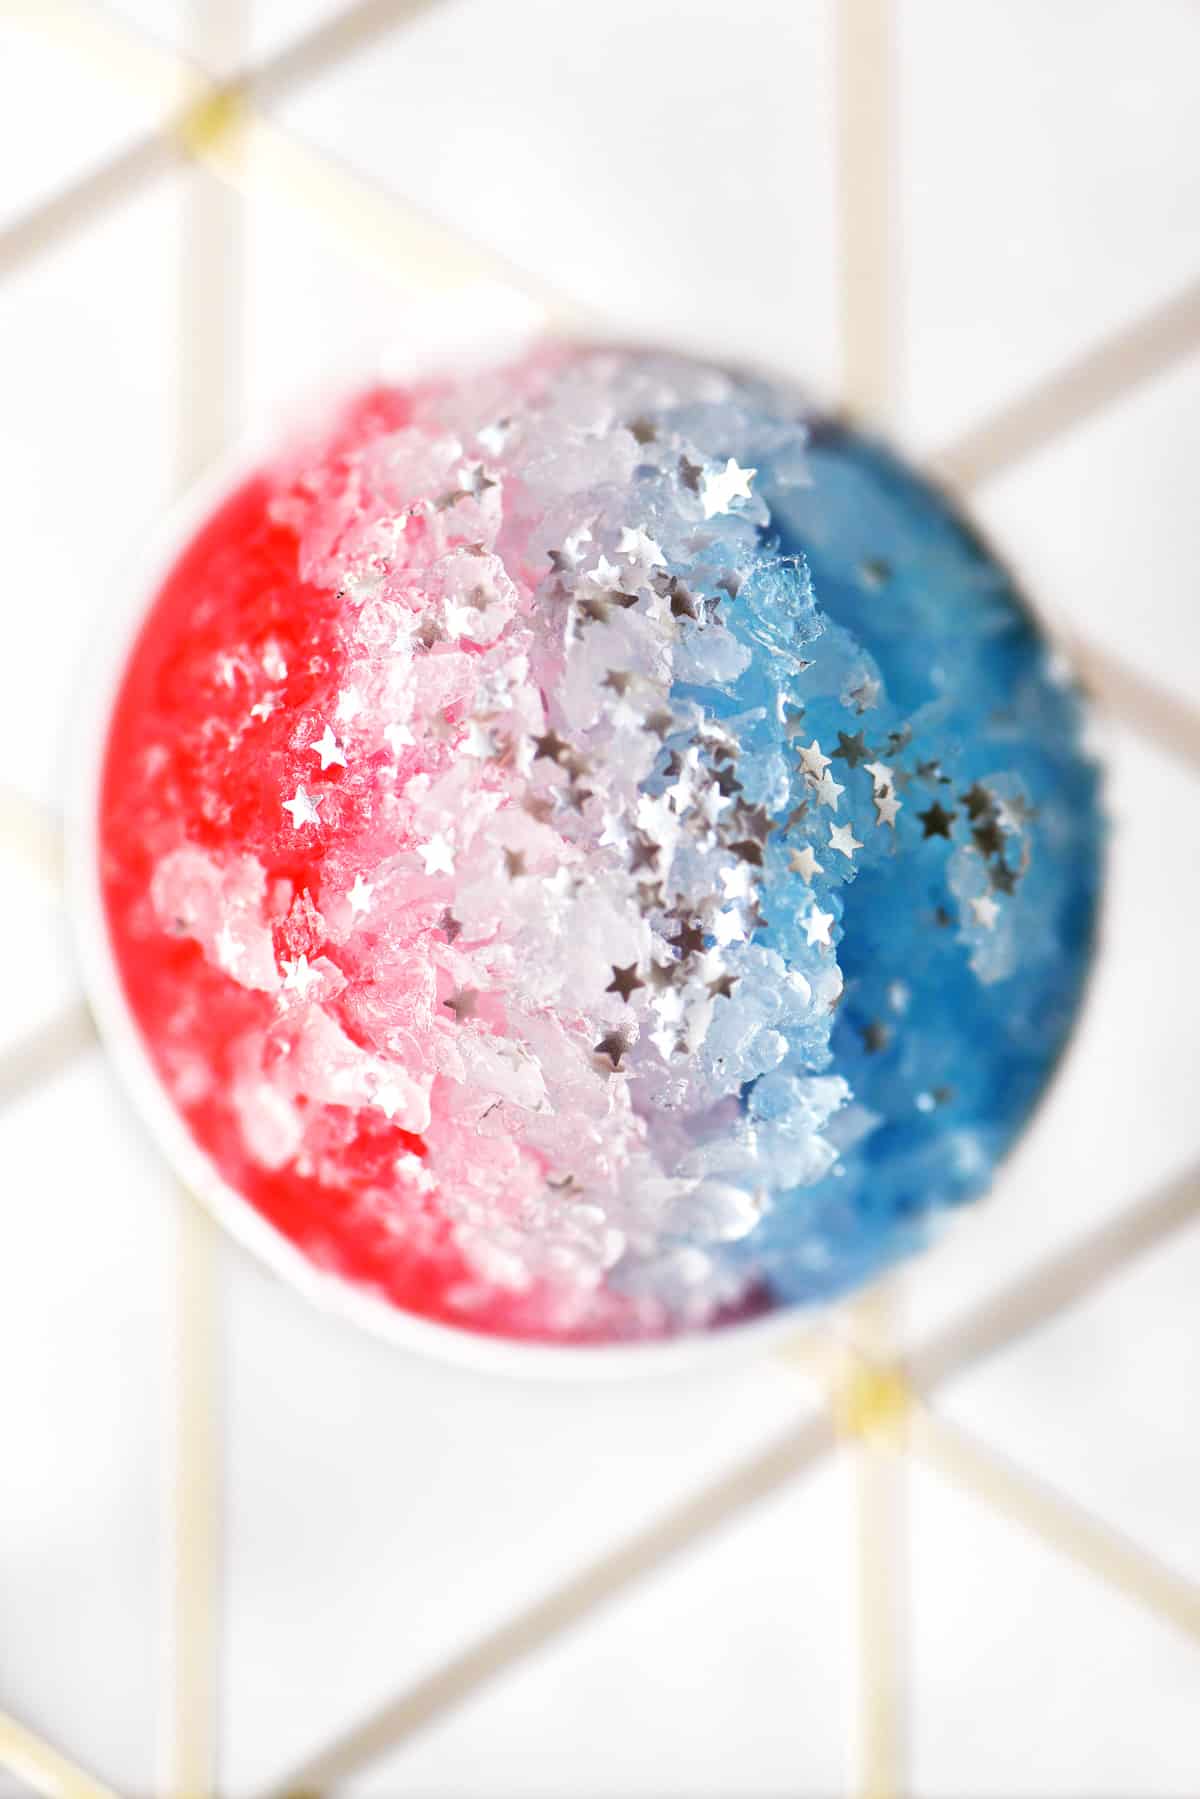 a red, white and blue ice with edible silver star sprinkles on top